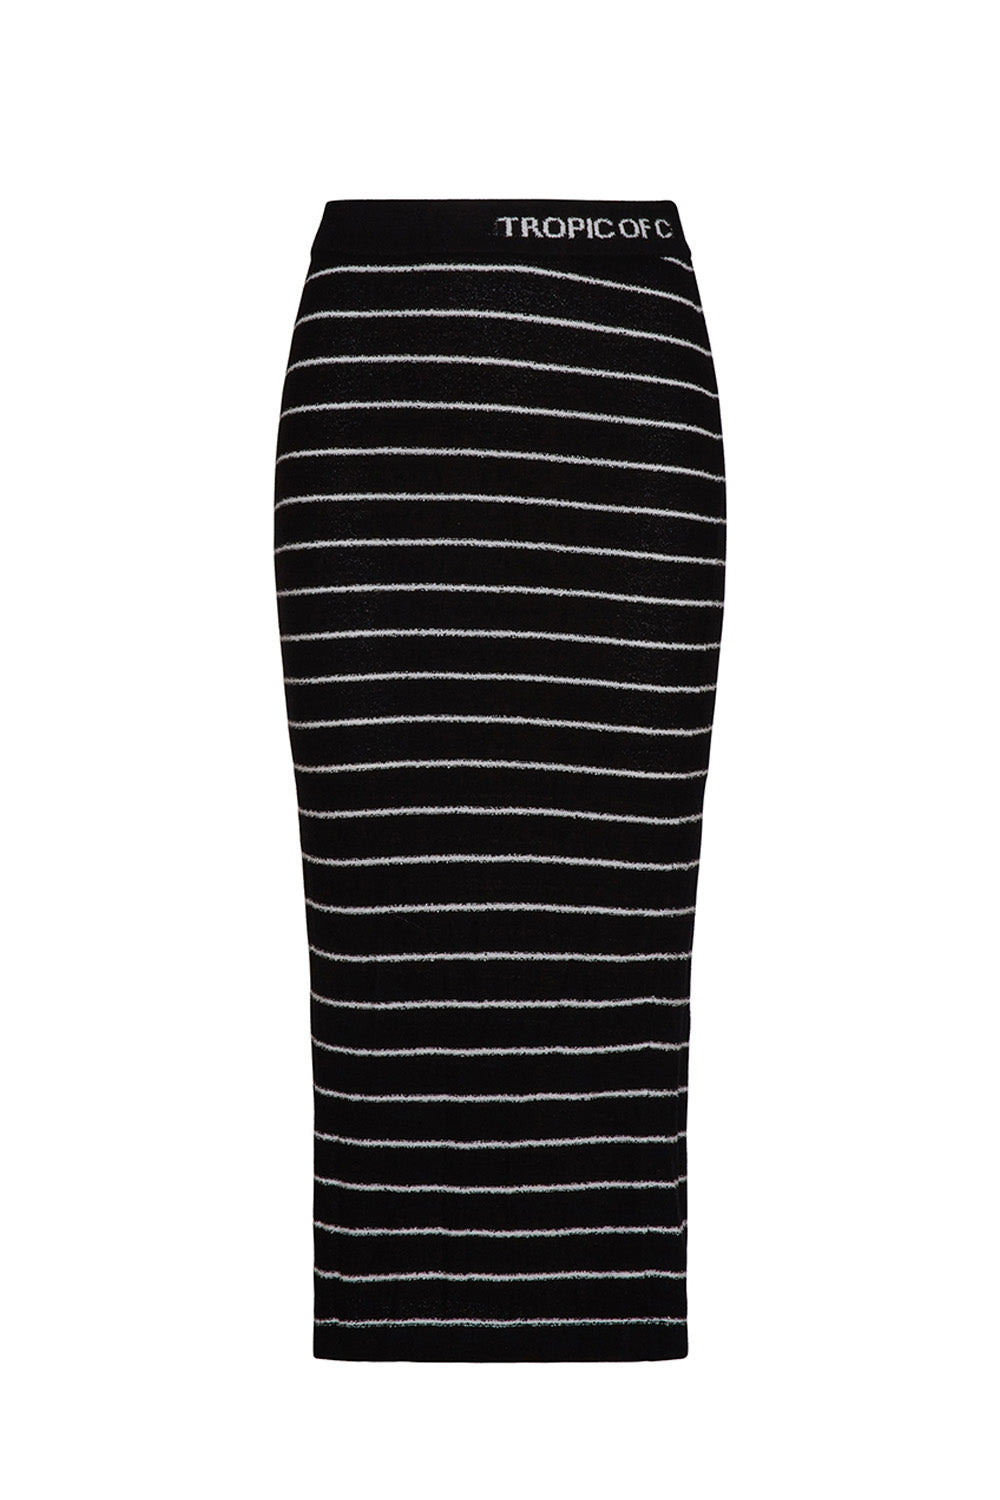 noblesse skirt in black and white stripe – tropic of c